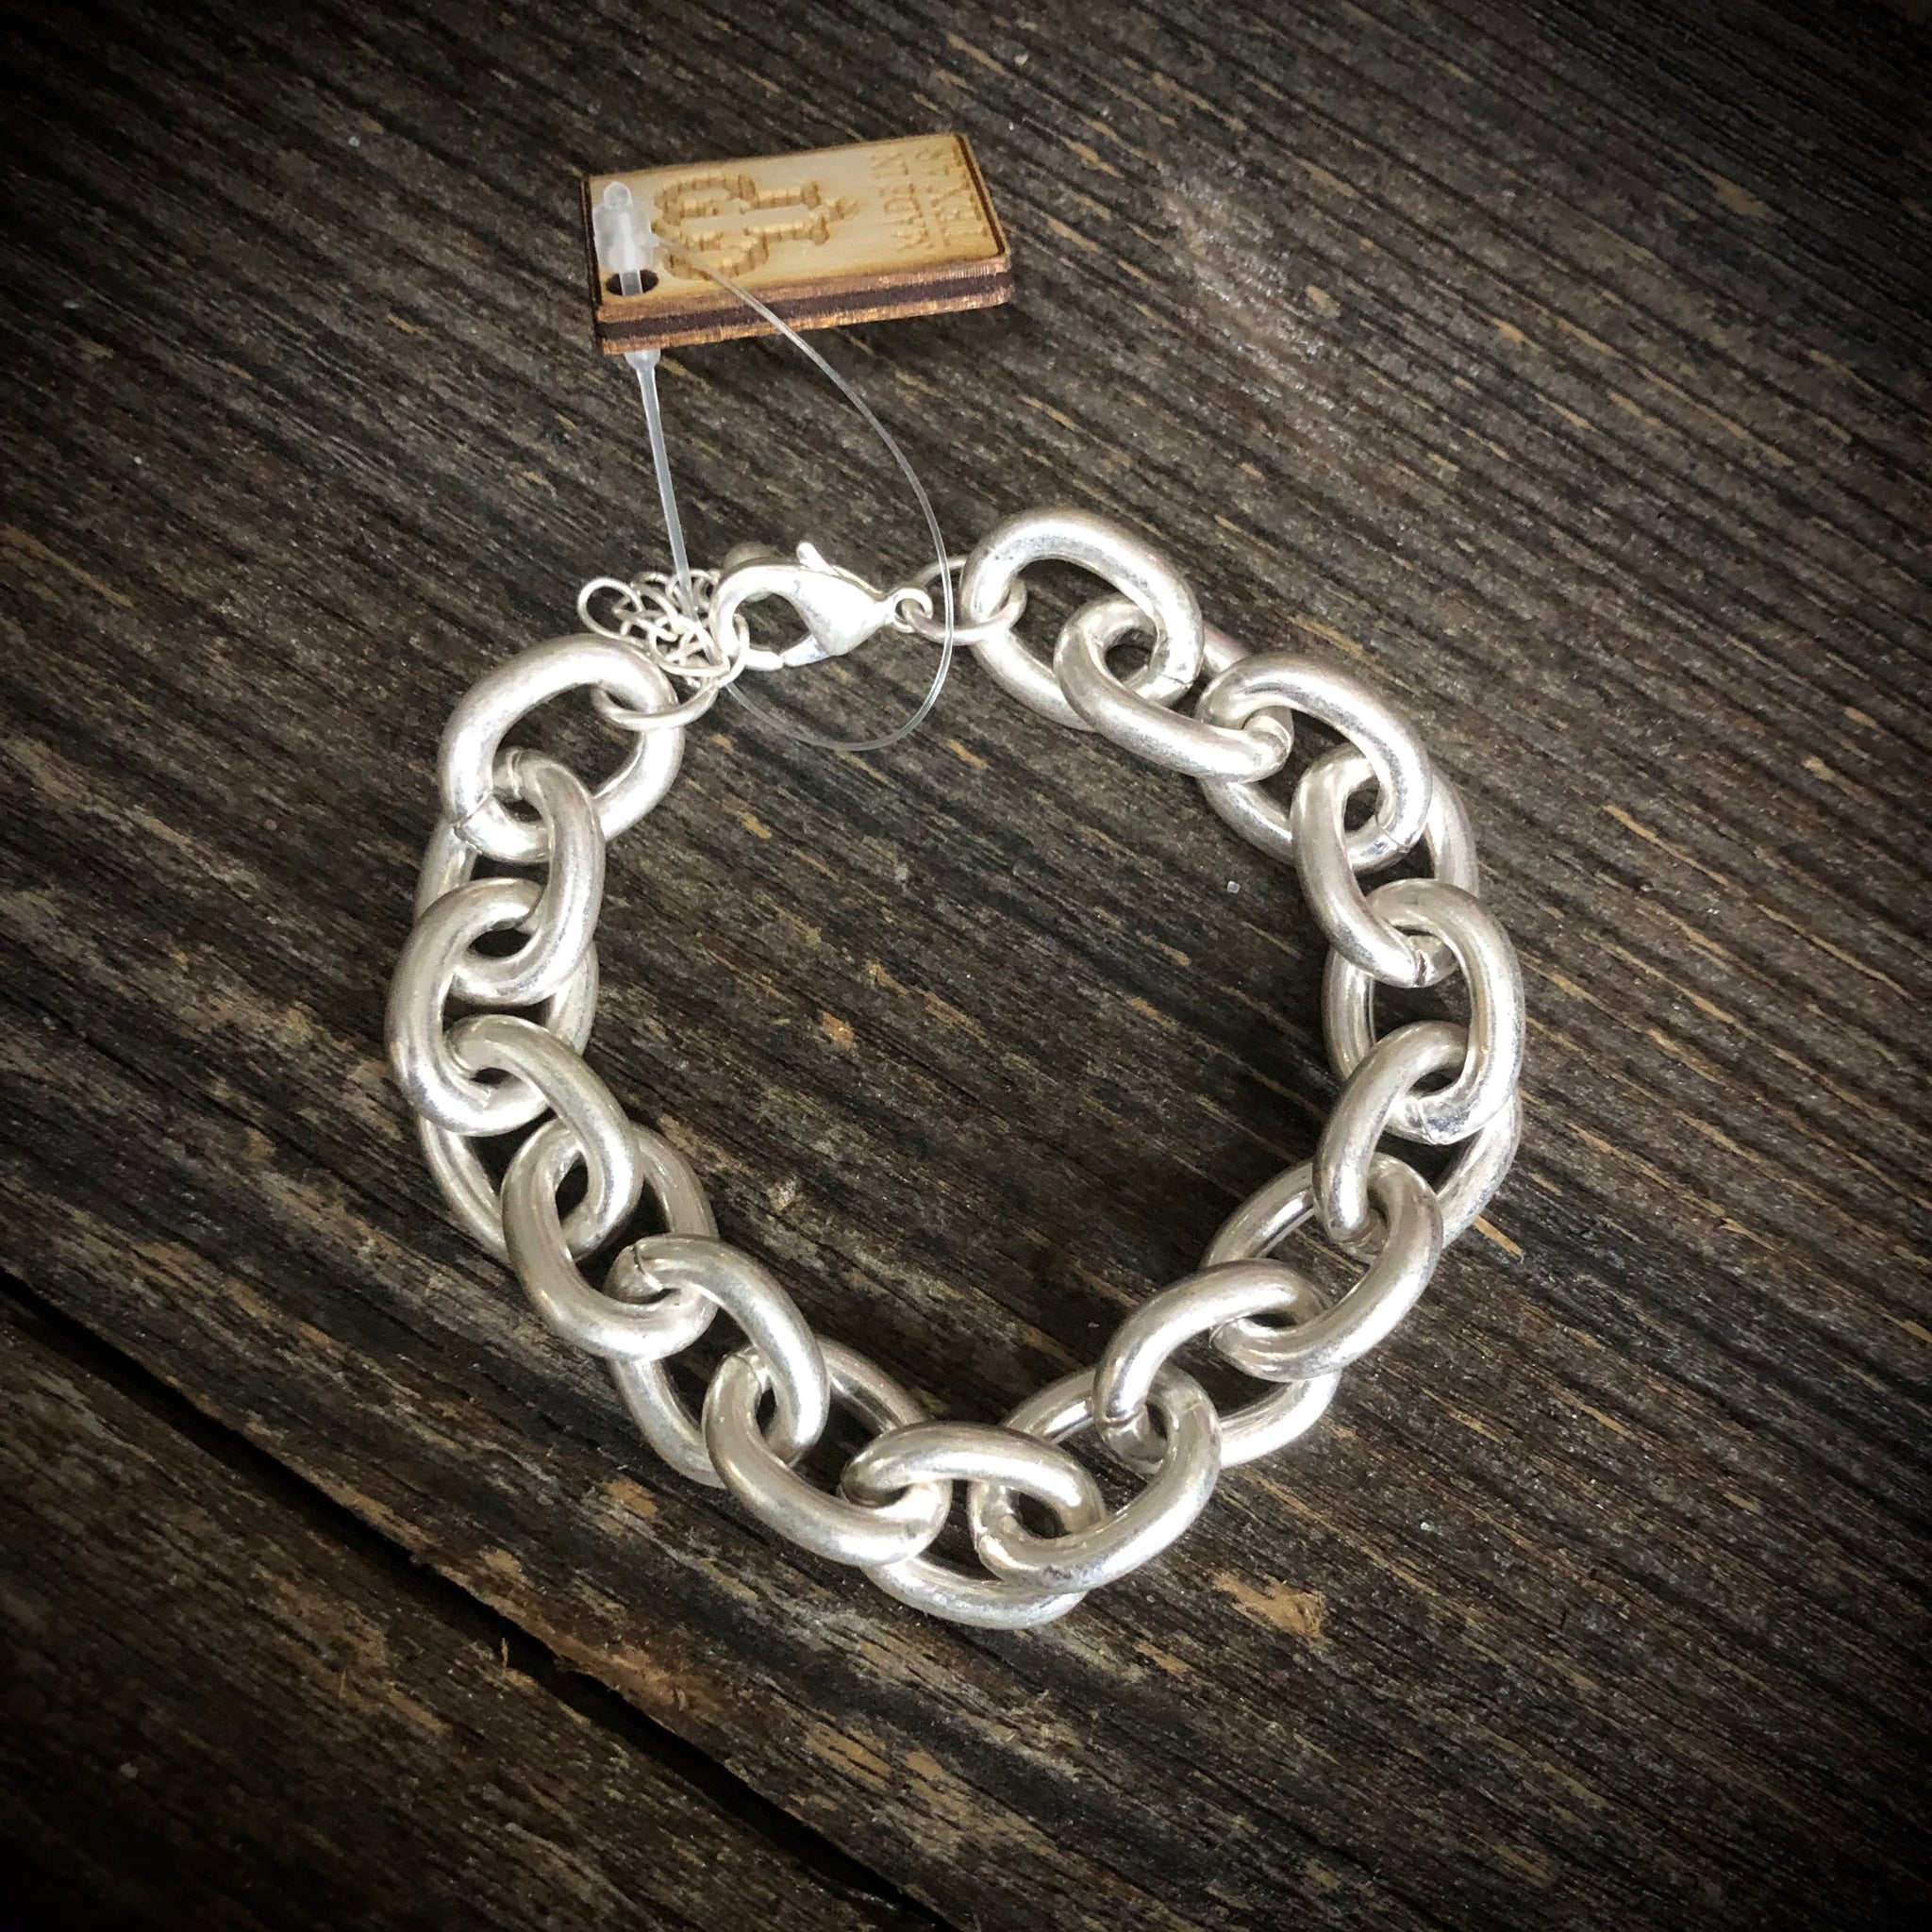 Chain Link Bracelet With Adjustable Chain